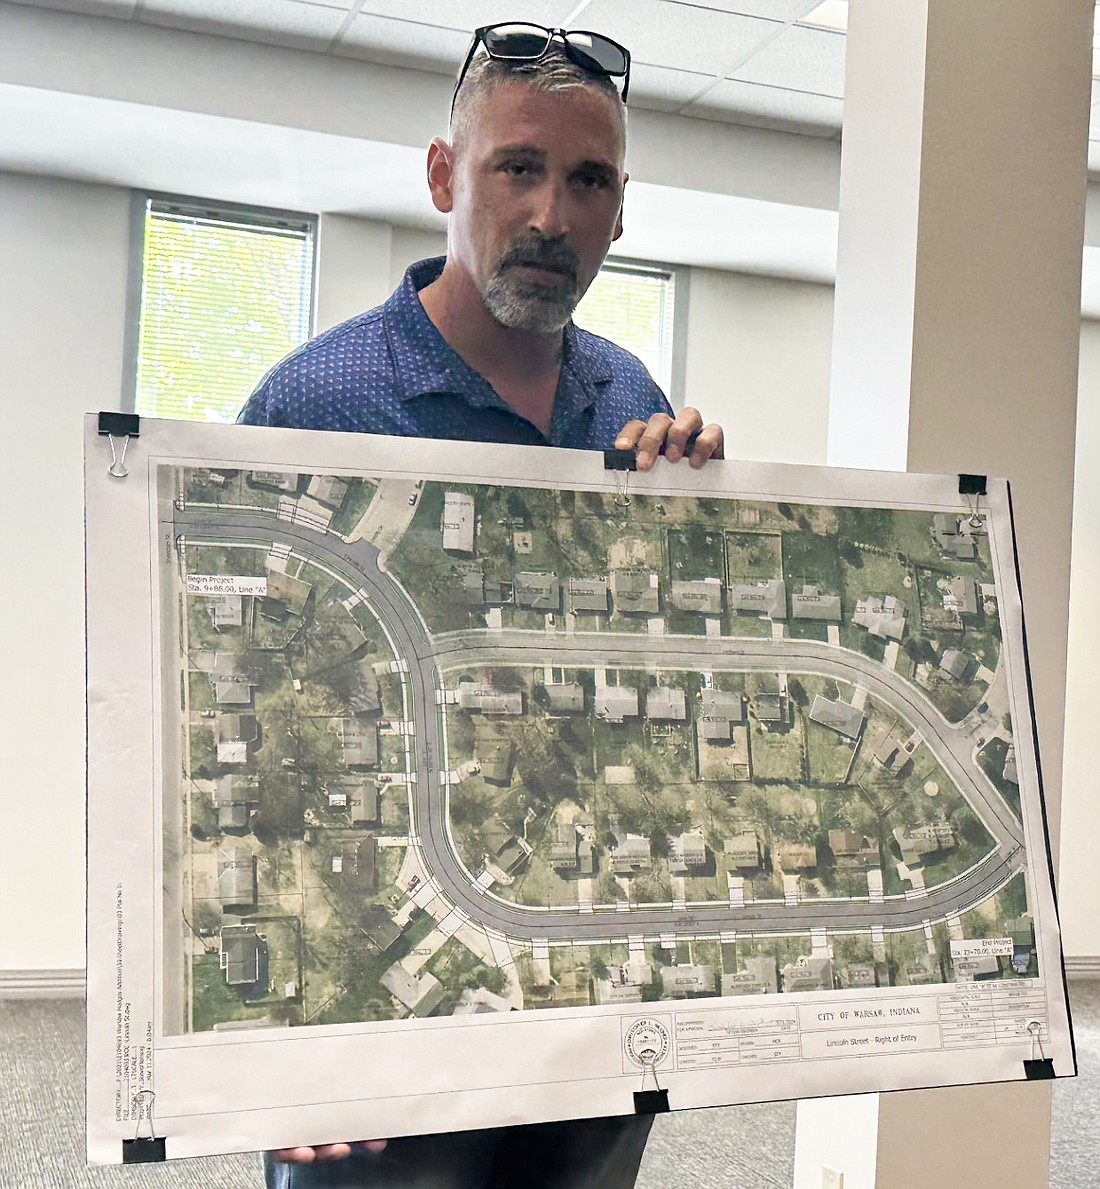 Warsaw Public Works Superintendent Dustin Dillon displays a blown-up graphic of what the reconstruction of Hodges Addition phase 3, Lincoln Street, project will look like once it’s completed, to the Board of Public Works and Safety on Friday. Photo by David Slone, Times-Union